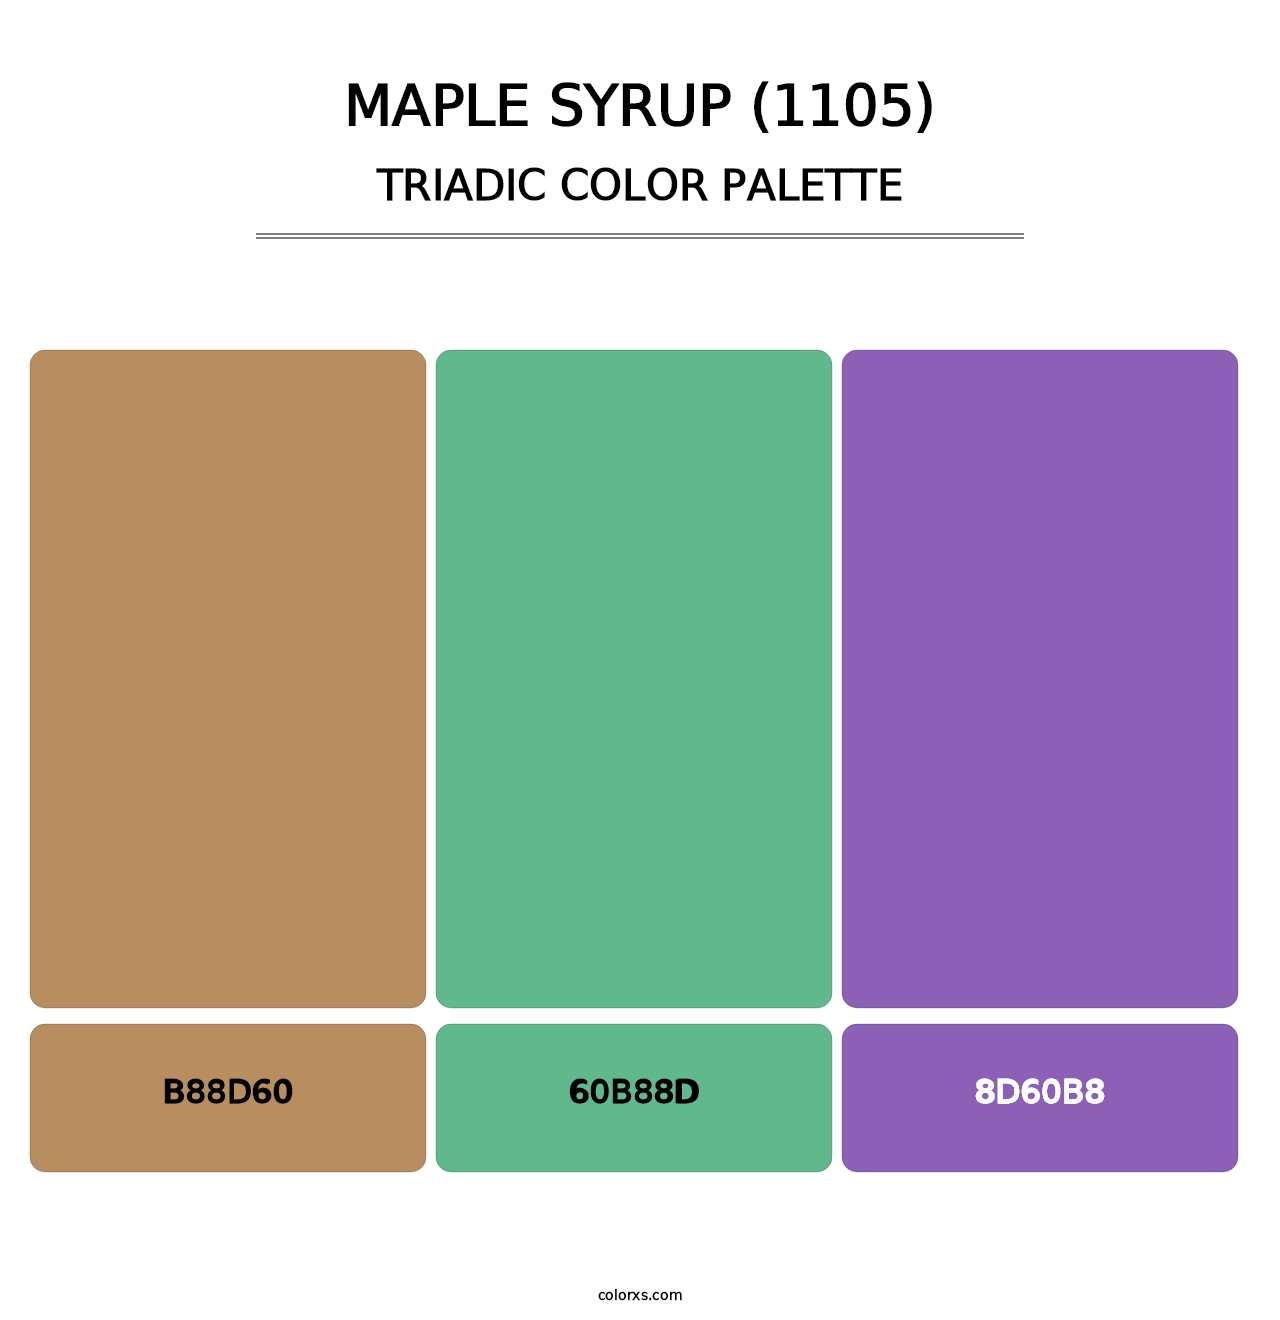 Maple Syrup (1105) - Triadic Color Palette